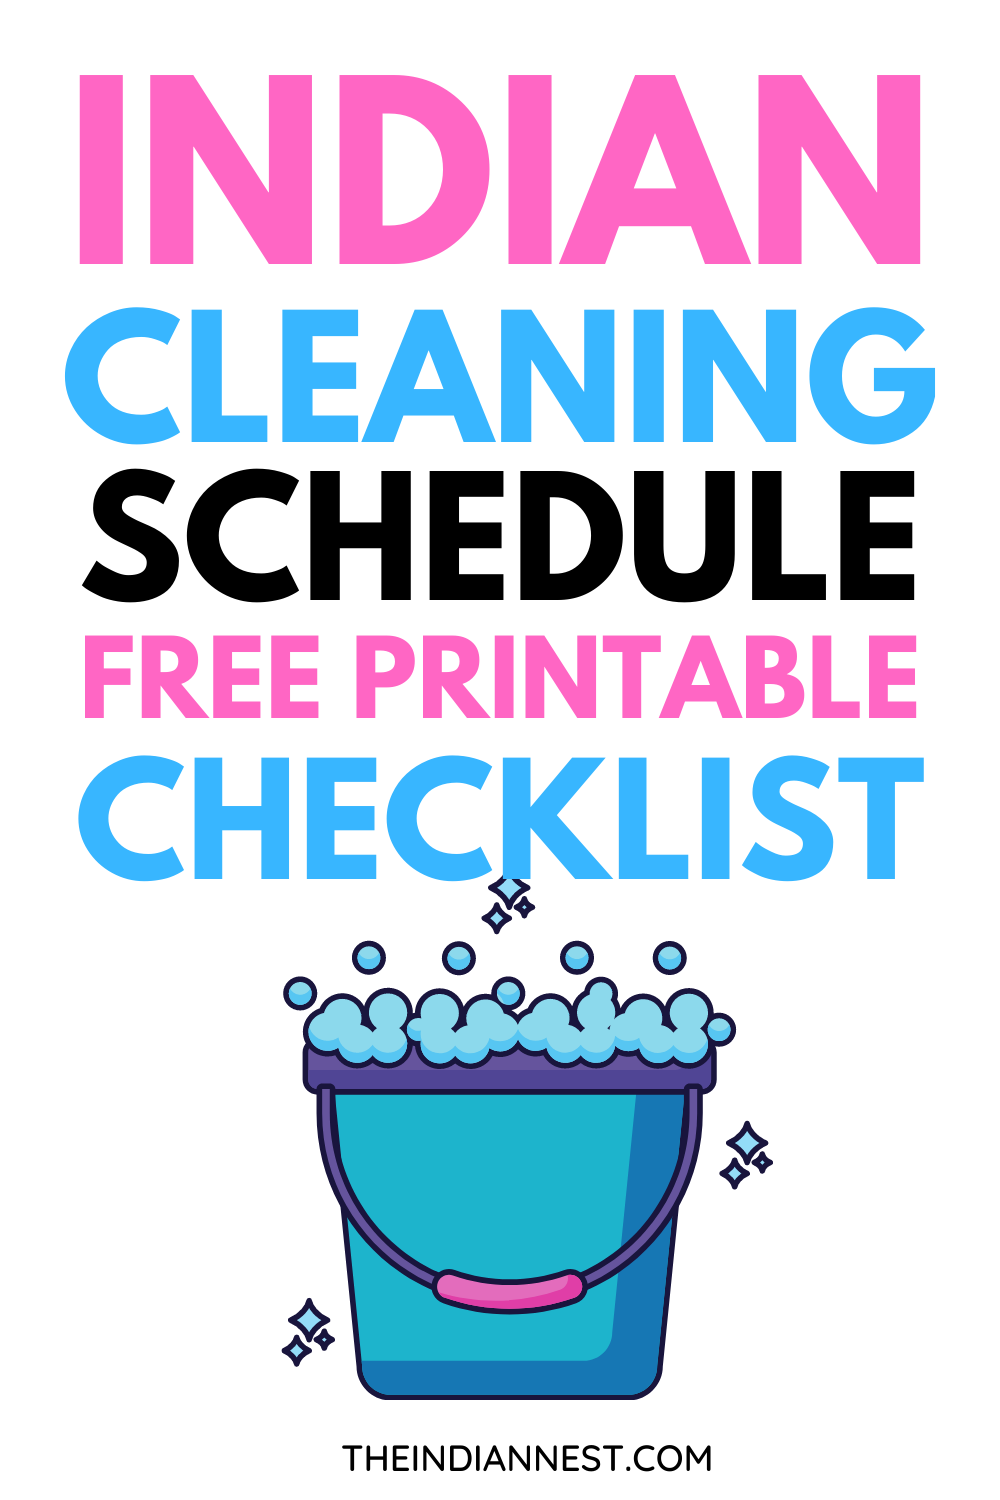 Indian Cleaning Schedule | Smart Ways To Clean The House cleaning with free printable checklist. I have shared my daily home cleaning routine with a free printable checklist. 